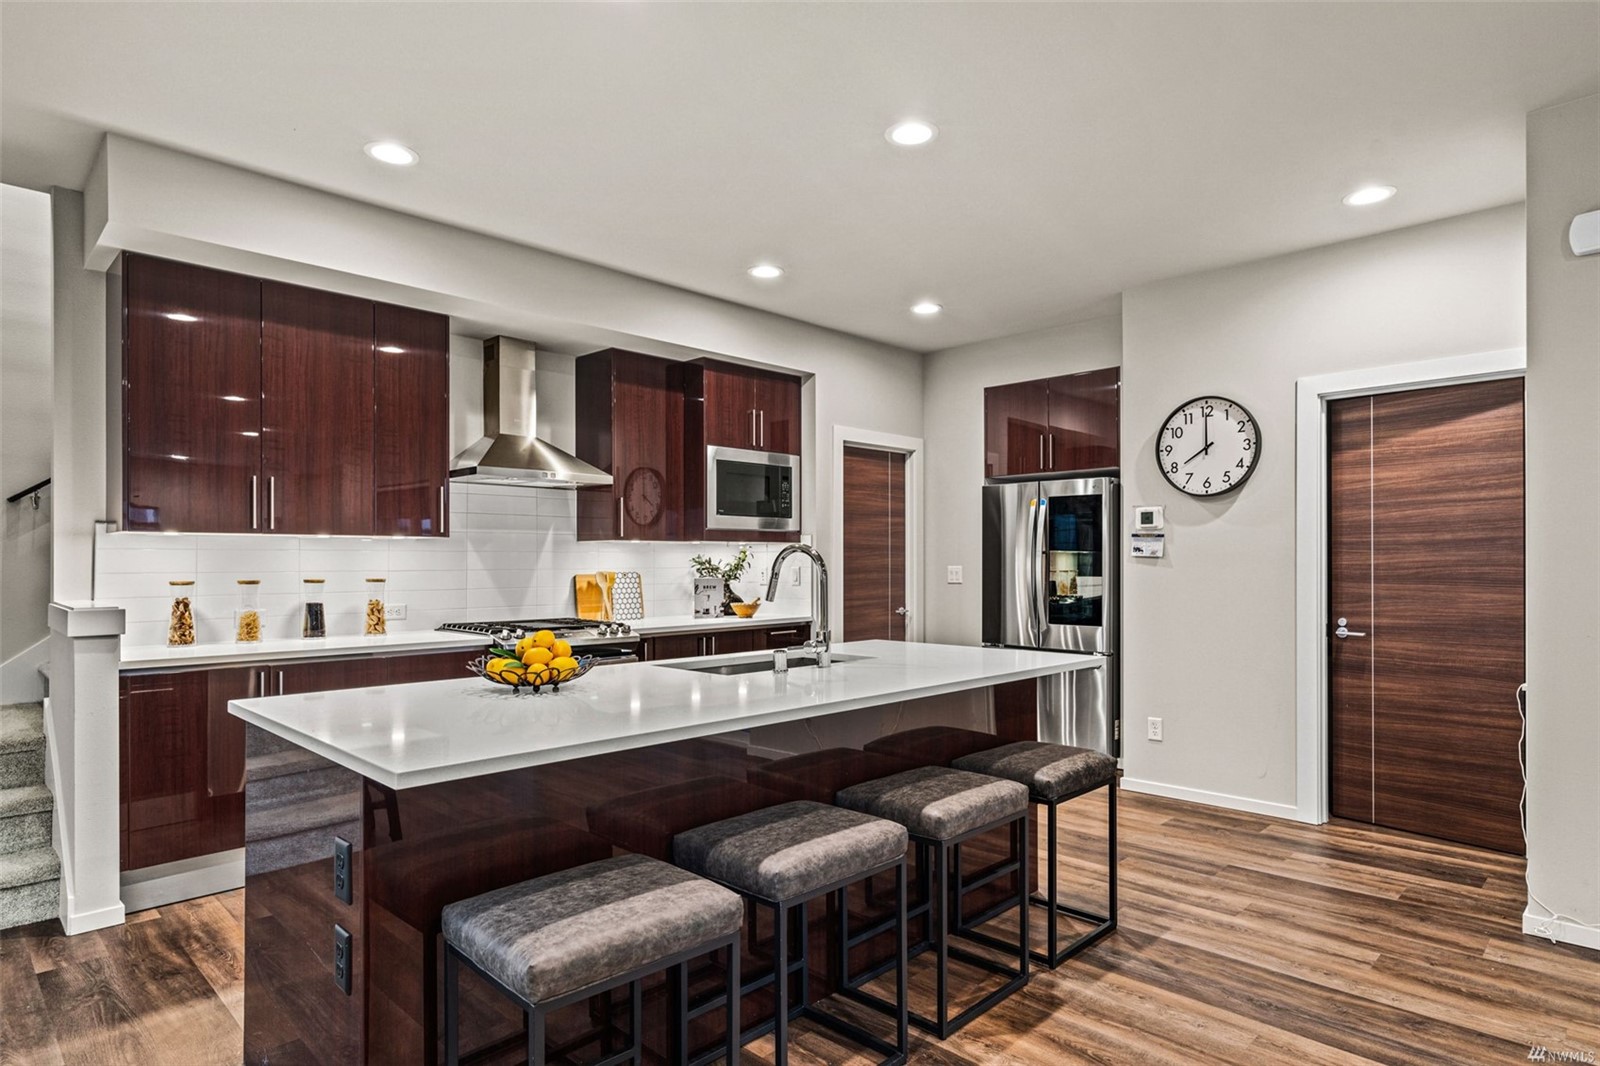 Modern updated kitchen for first time home buyers